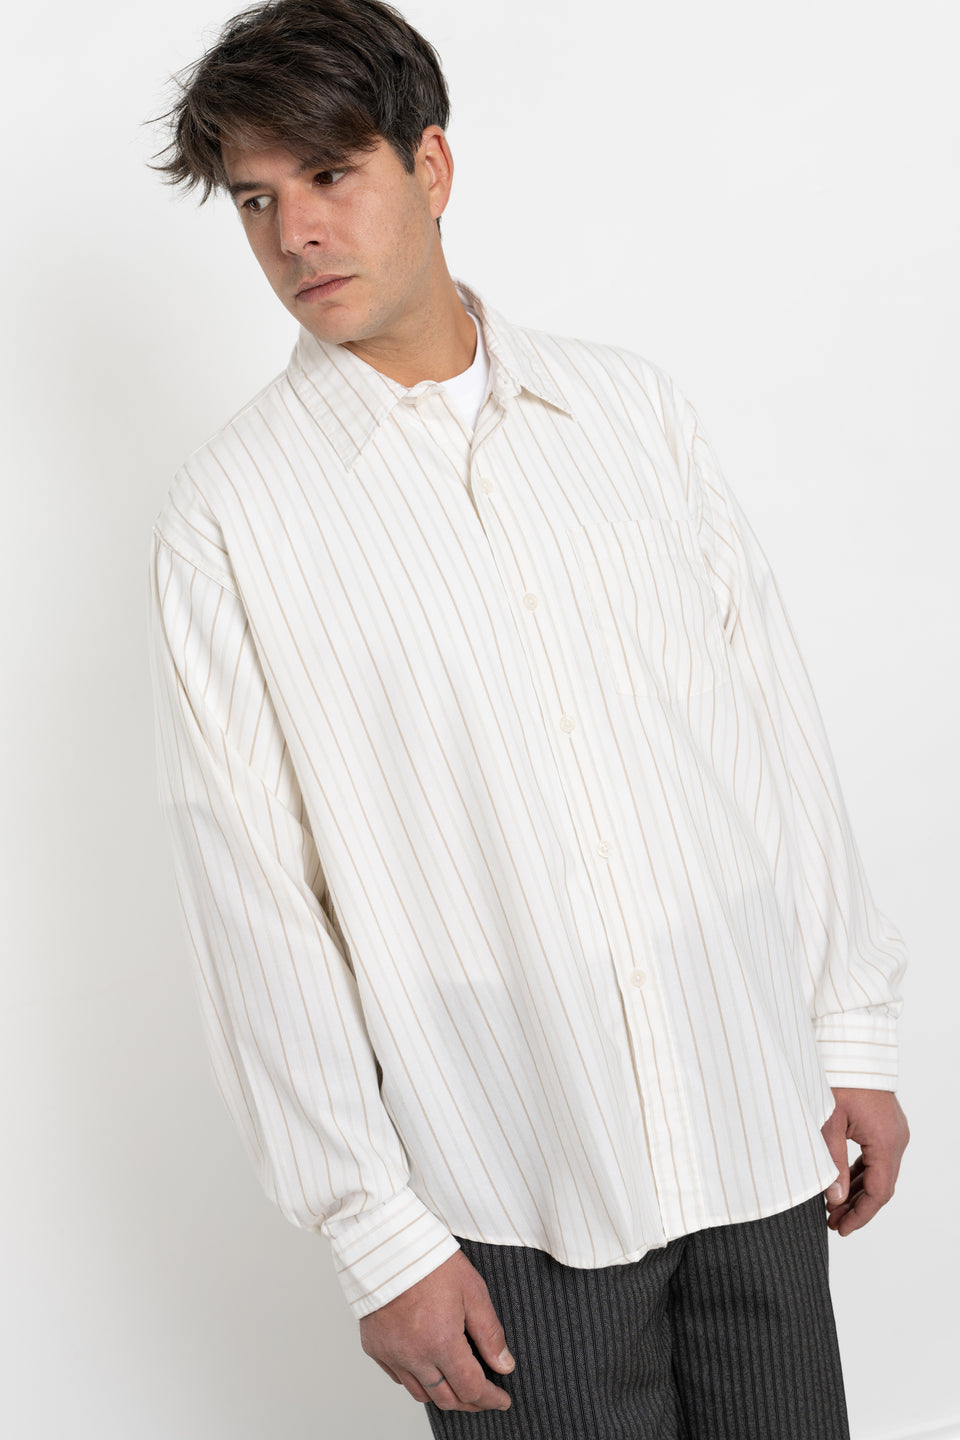 mfpen AW23 or FW23 Men's Collection Executive Shirt Beige Stripe Silk Calculus Victoria BC Canada